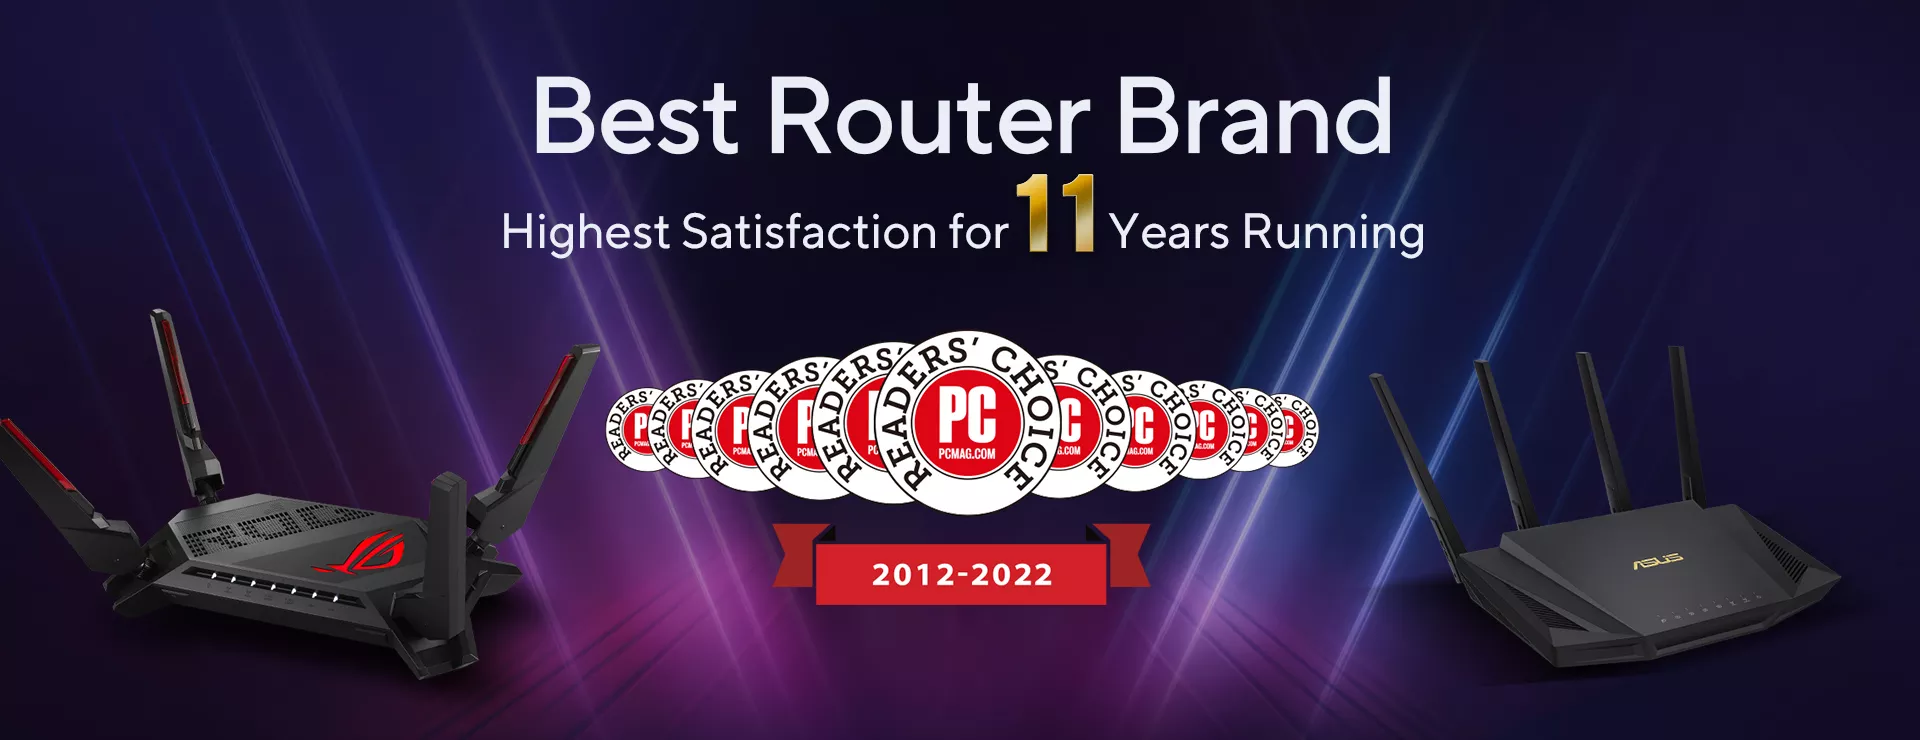 PCMag best router brand 11 years award banner with ROG Rapture GT-AX6000 and ASUS RT-AX58U